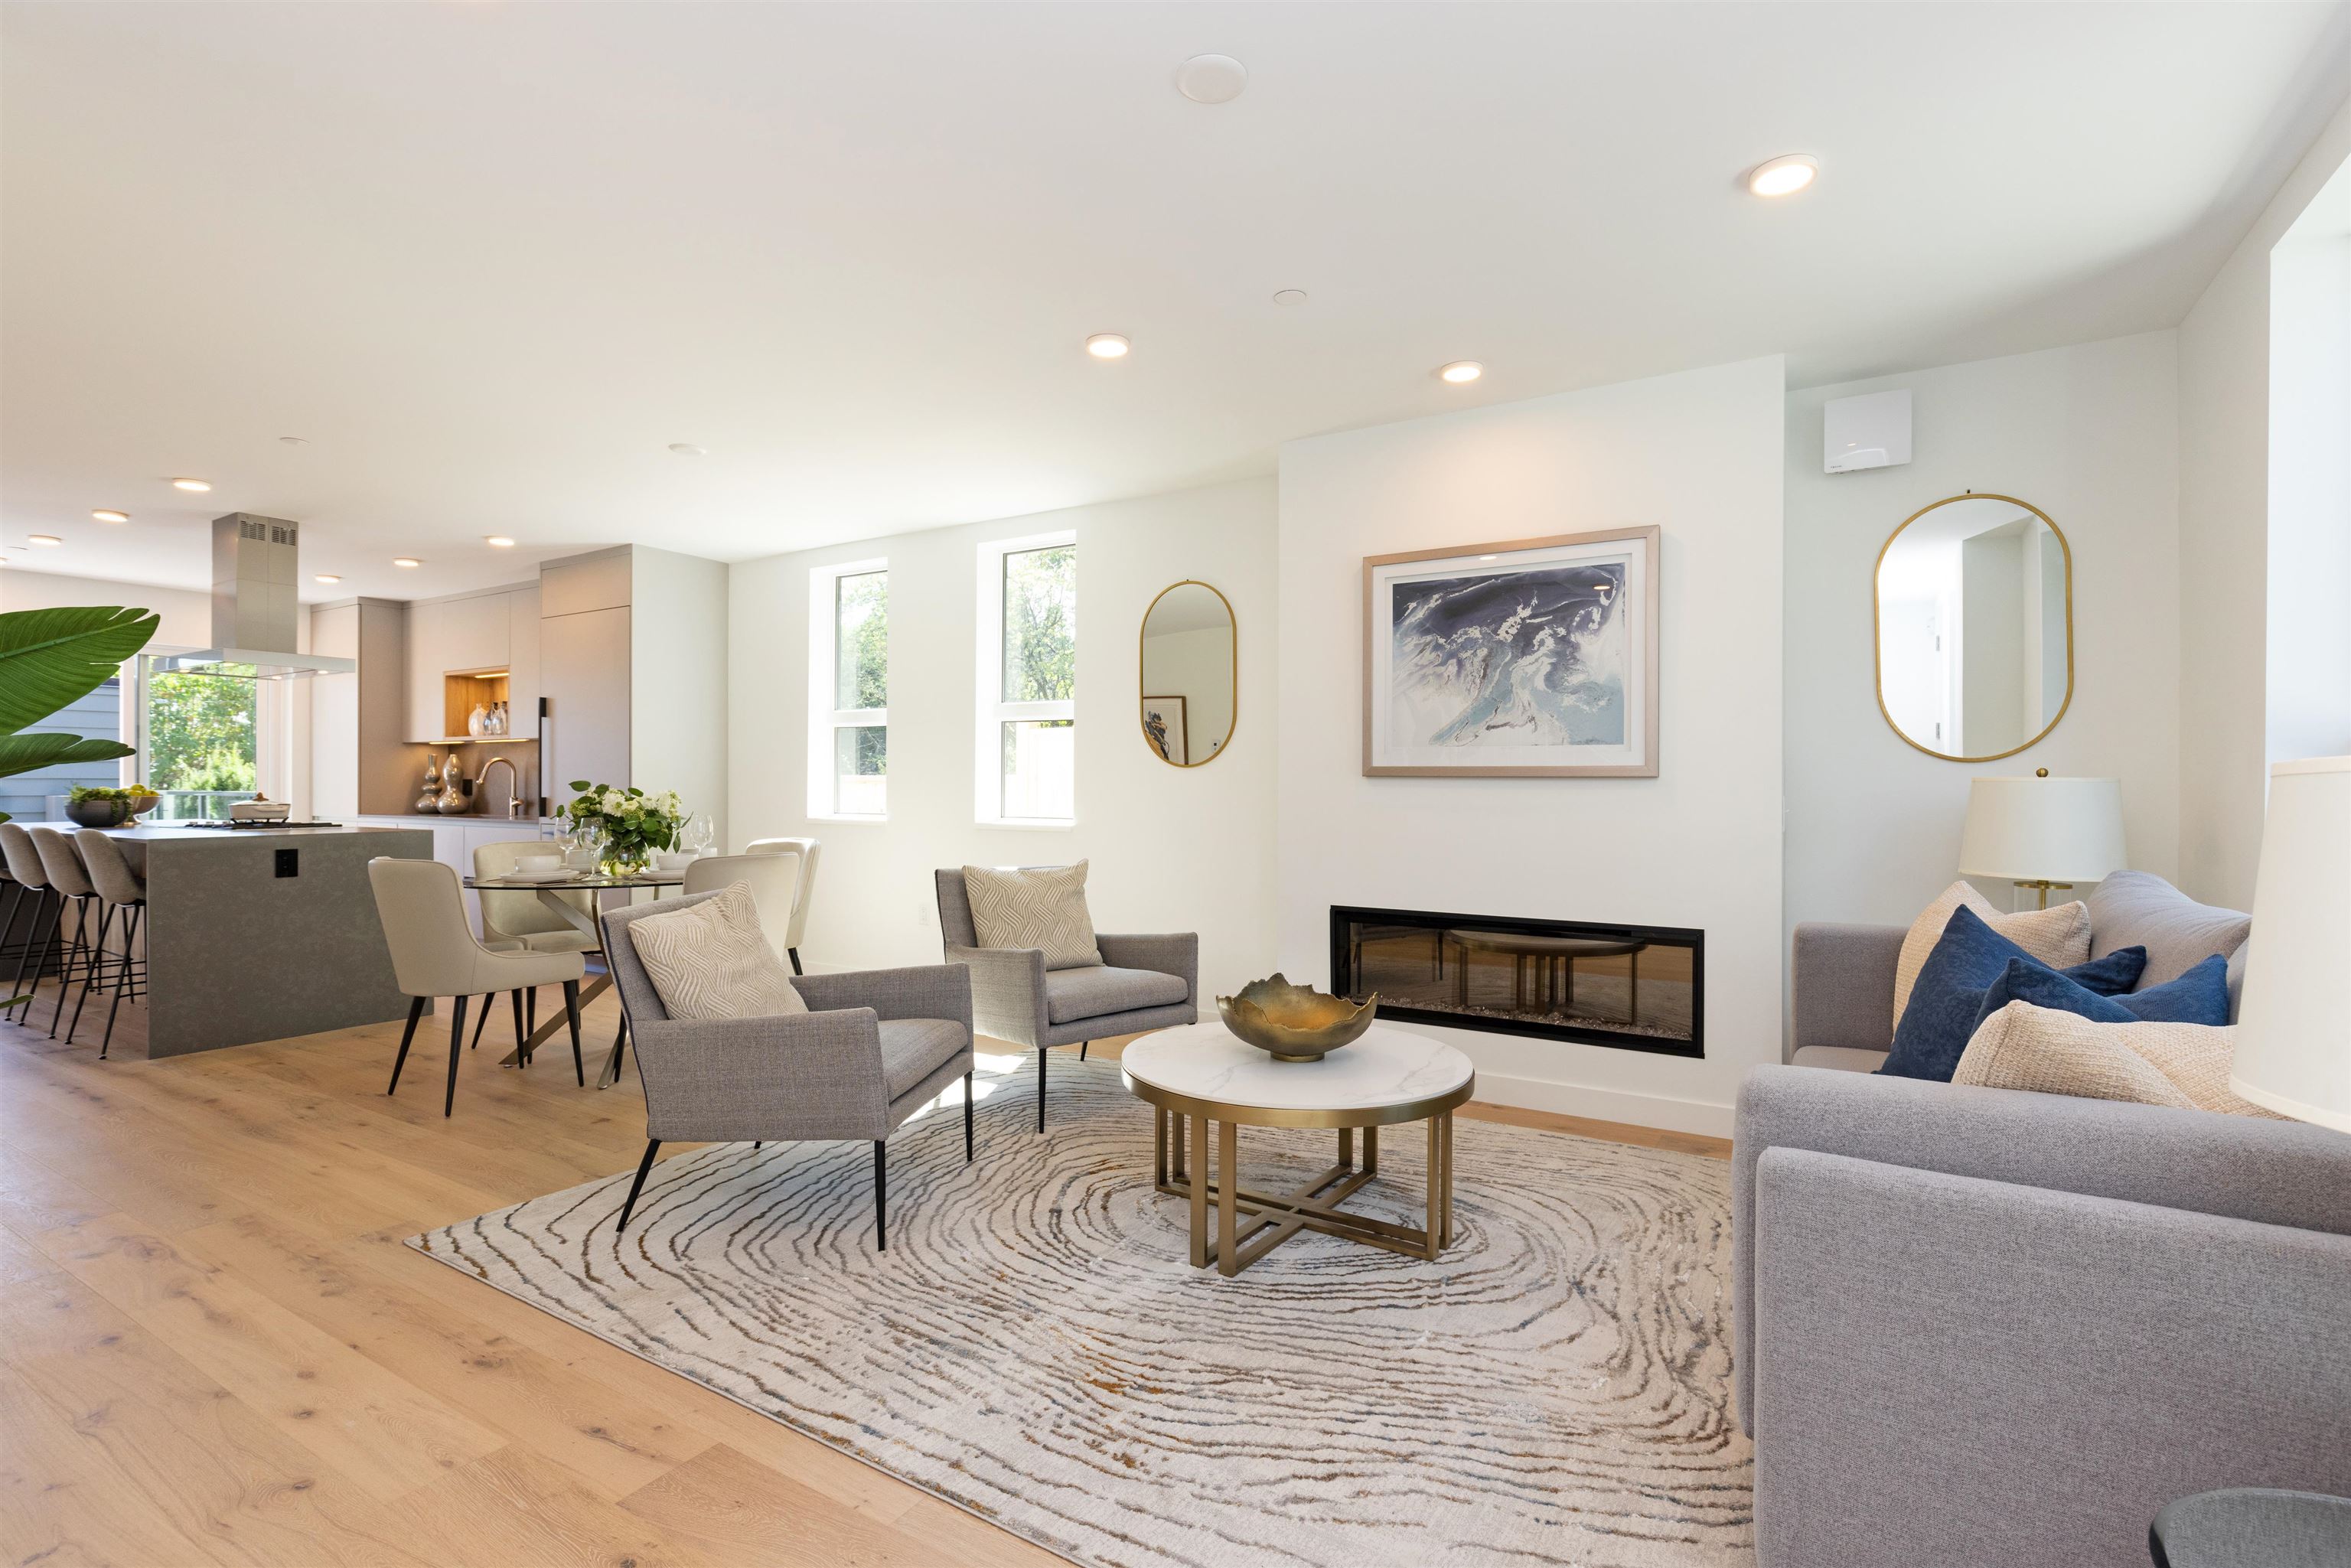 Floor plan is 19 feet wide and accommodates large-scale furniture.